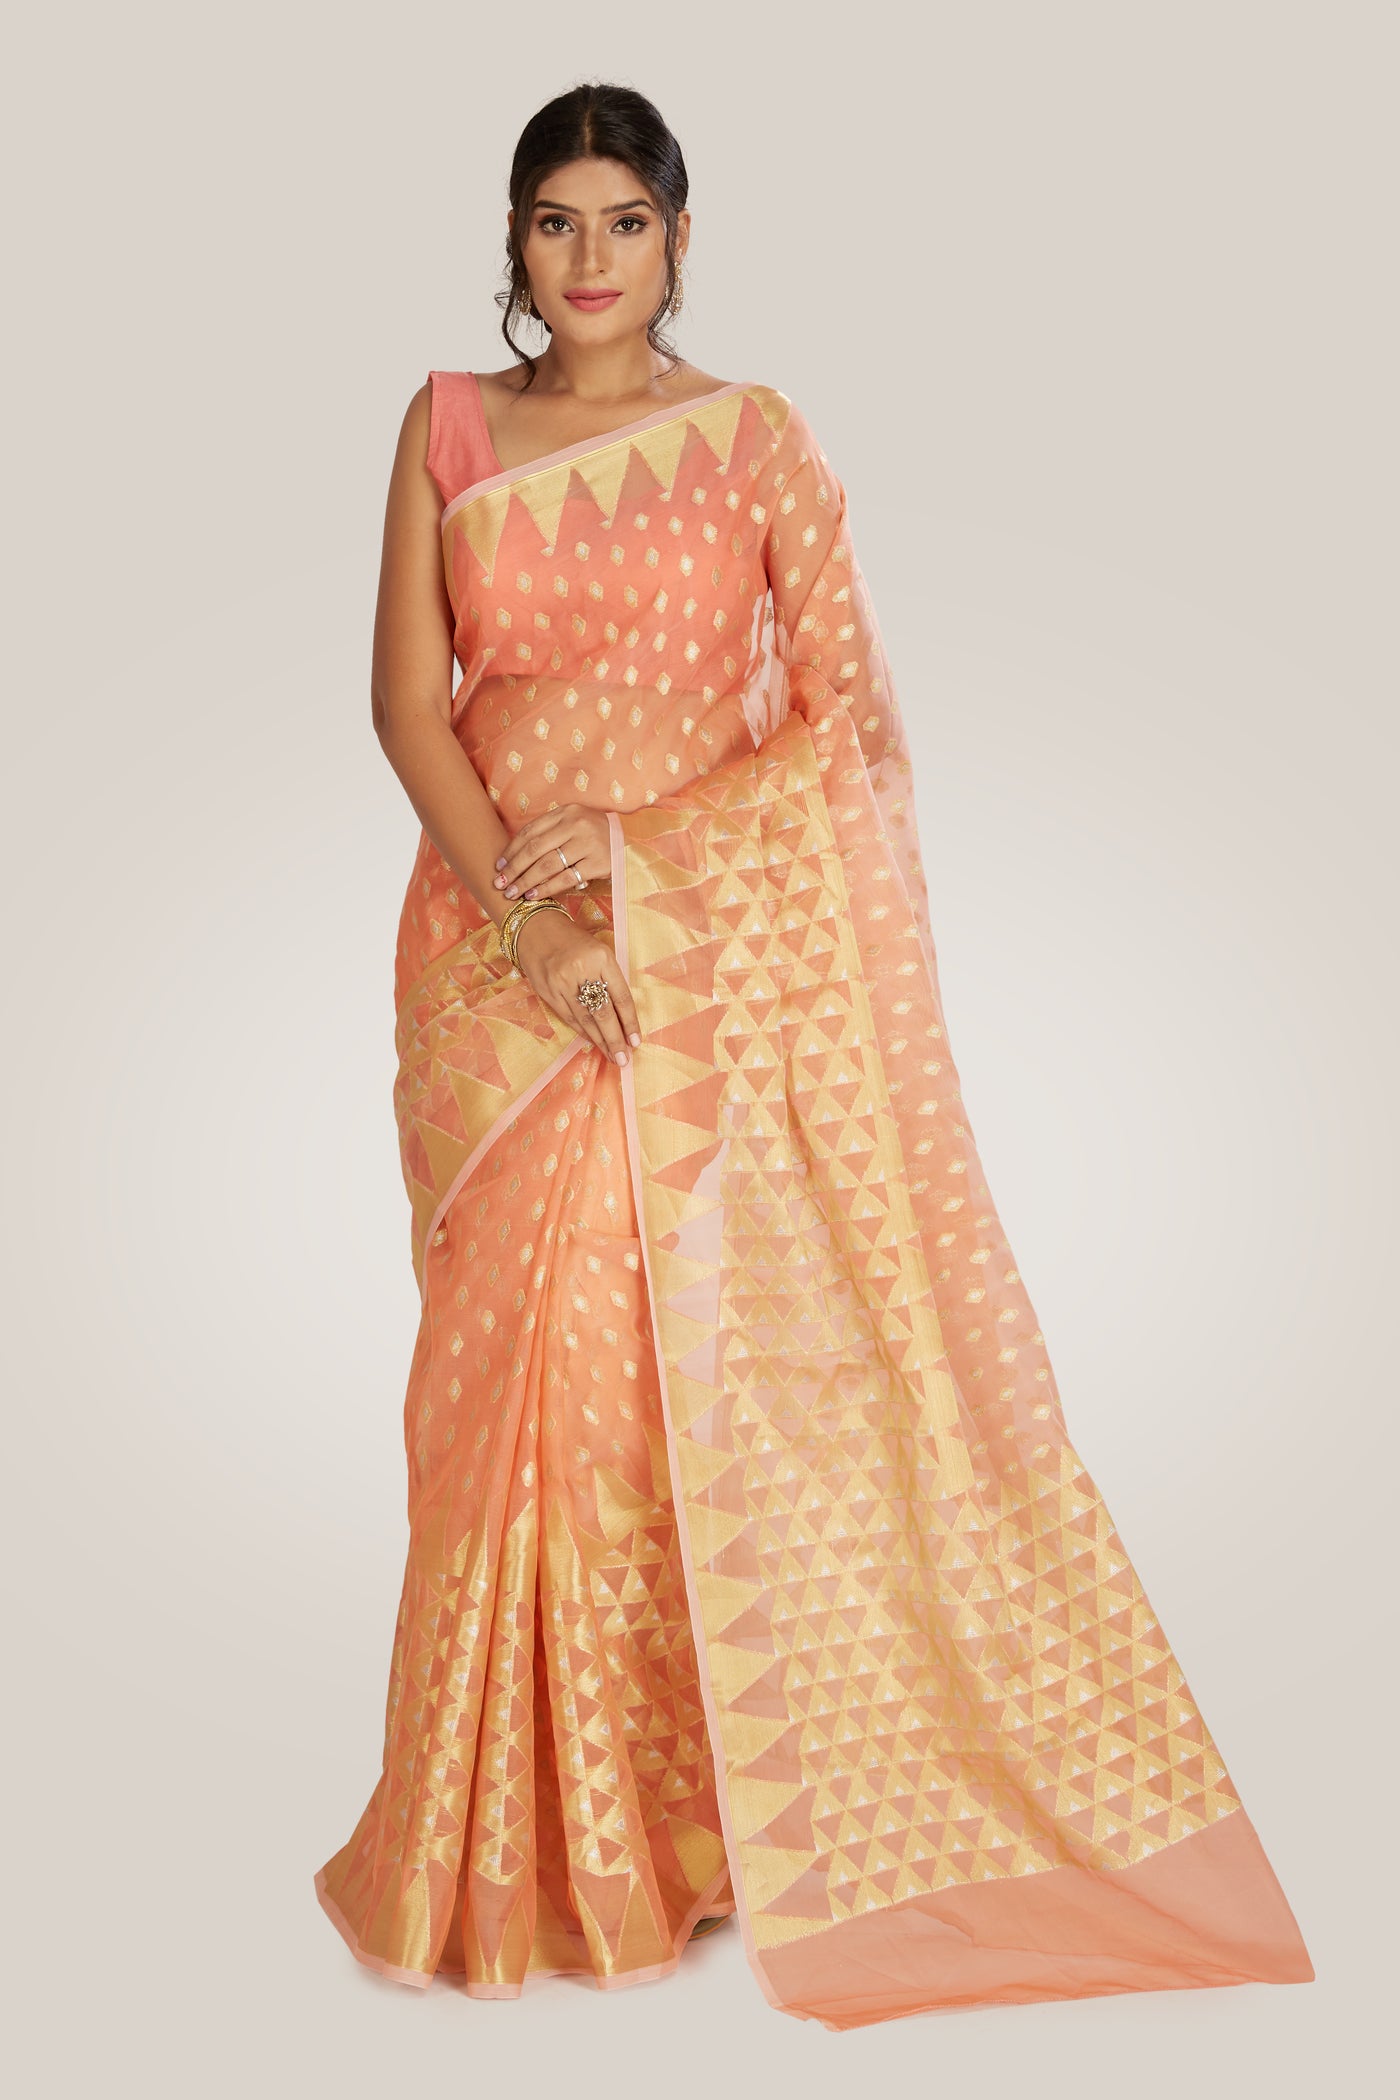 Peach Organza Tissue Saree - Indian Clothing in Denver, CO, Aurora, CO, Boulder, CO, Fort Collins, CO, Colorado Springs, CO, Parker, CO, Highlands Ranch, CO, Cherry Creek, CO, Centennial, CO, and Longmont, CO. Nationwide shipping USA - India Fashion X